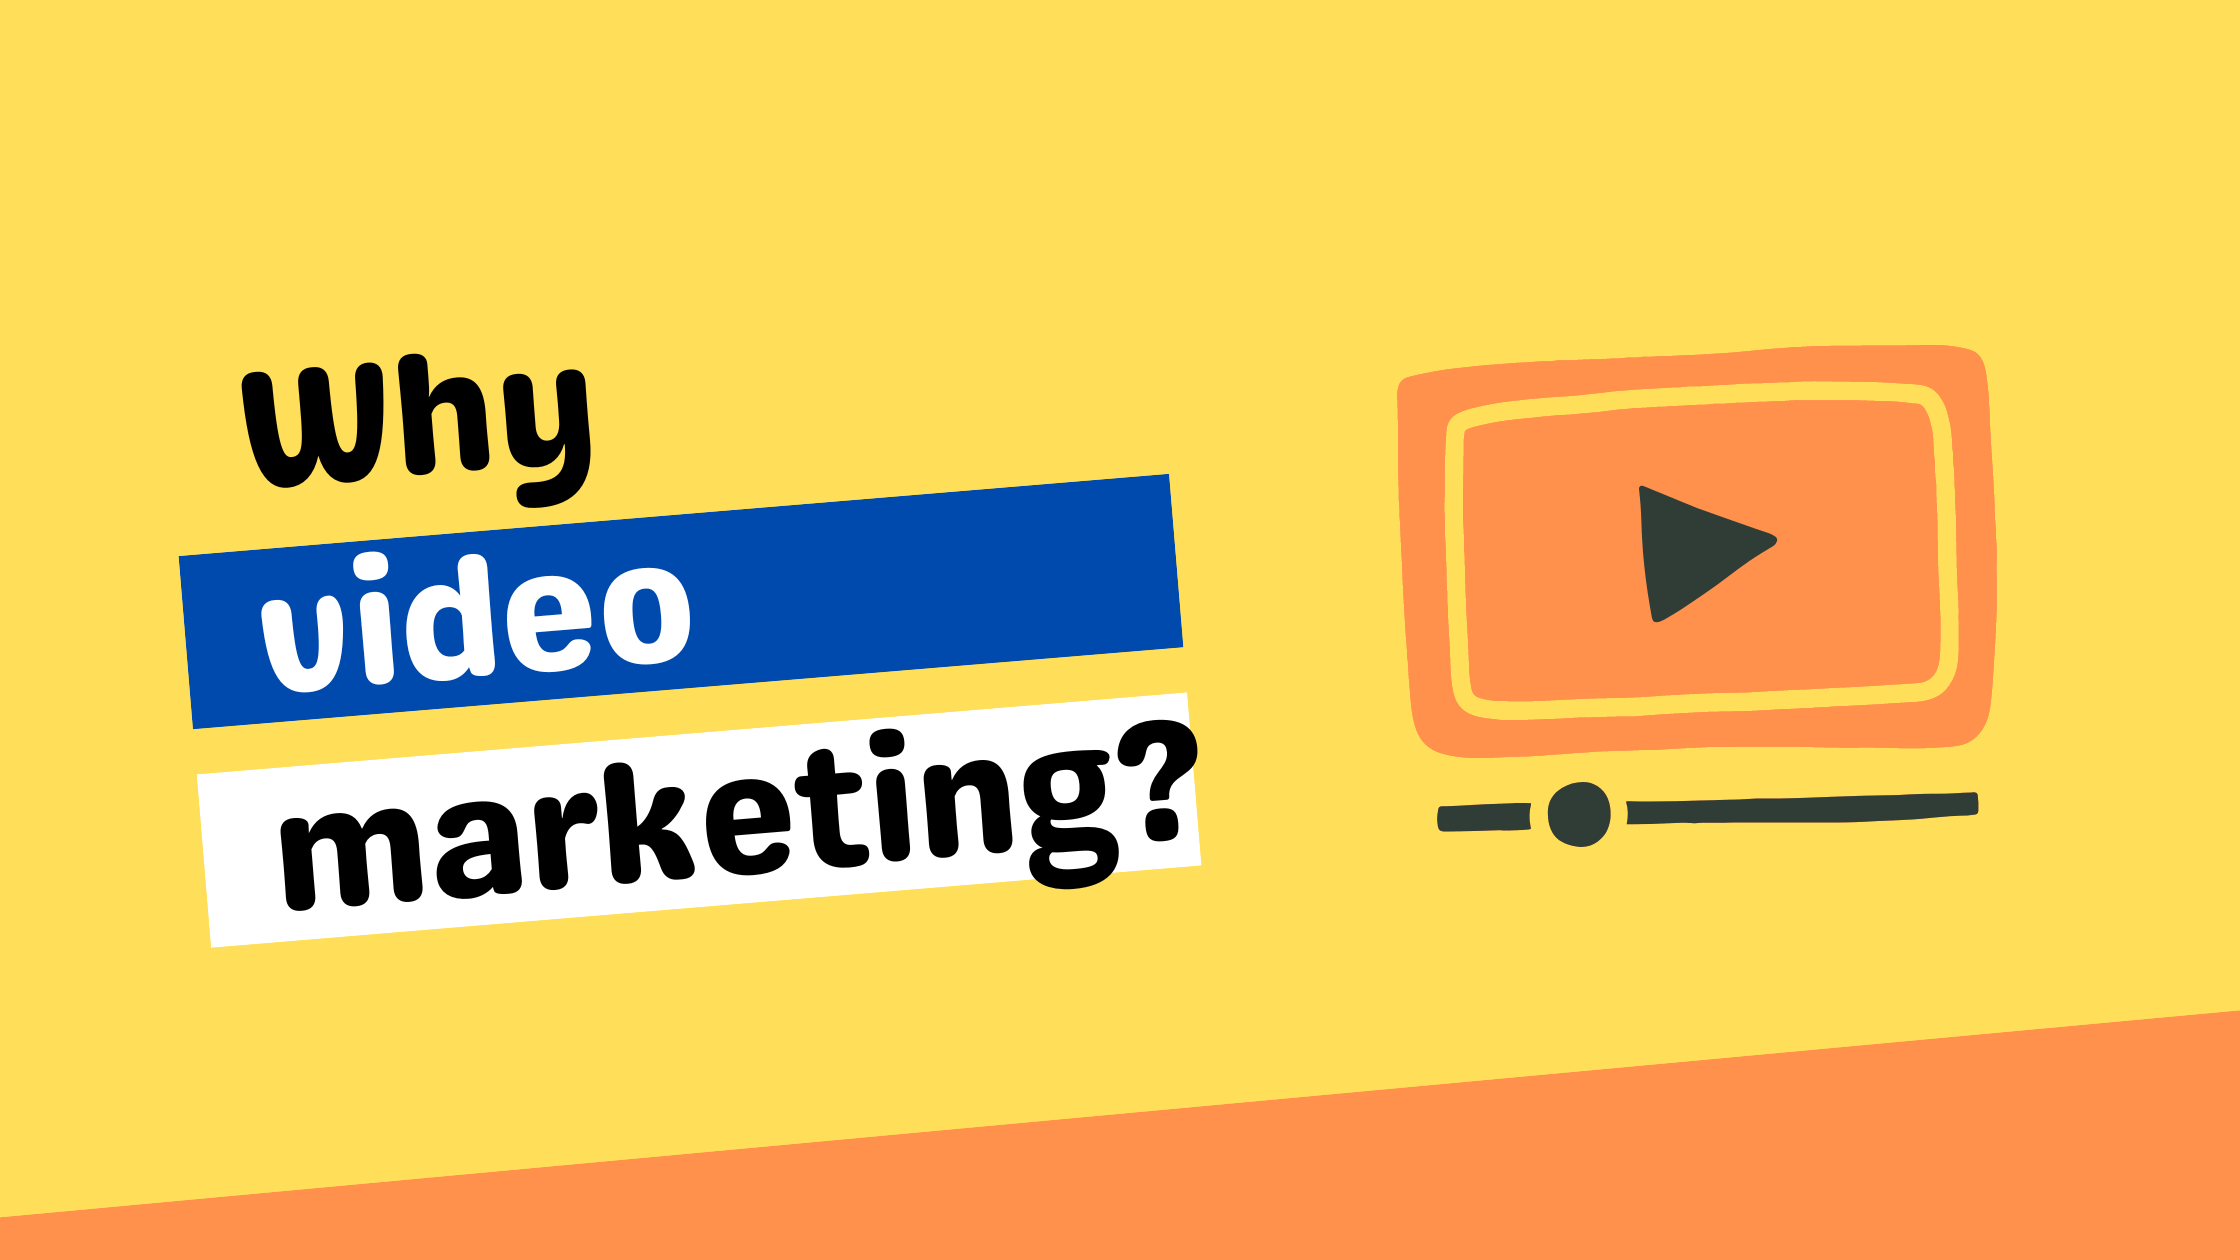 Why is video marketing crucial to your business?